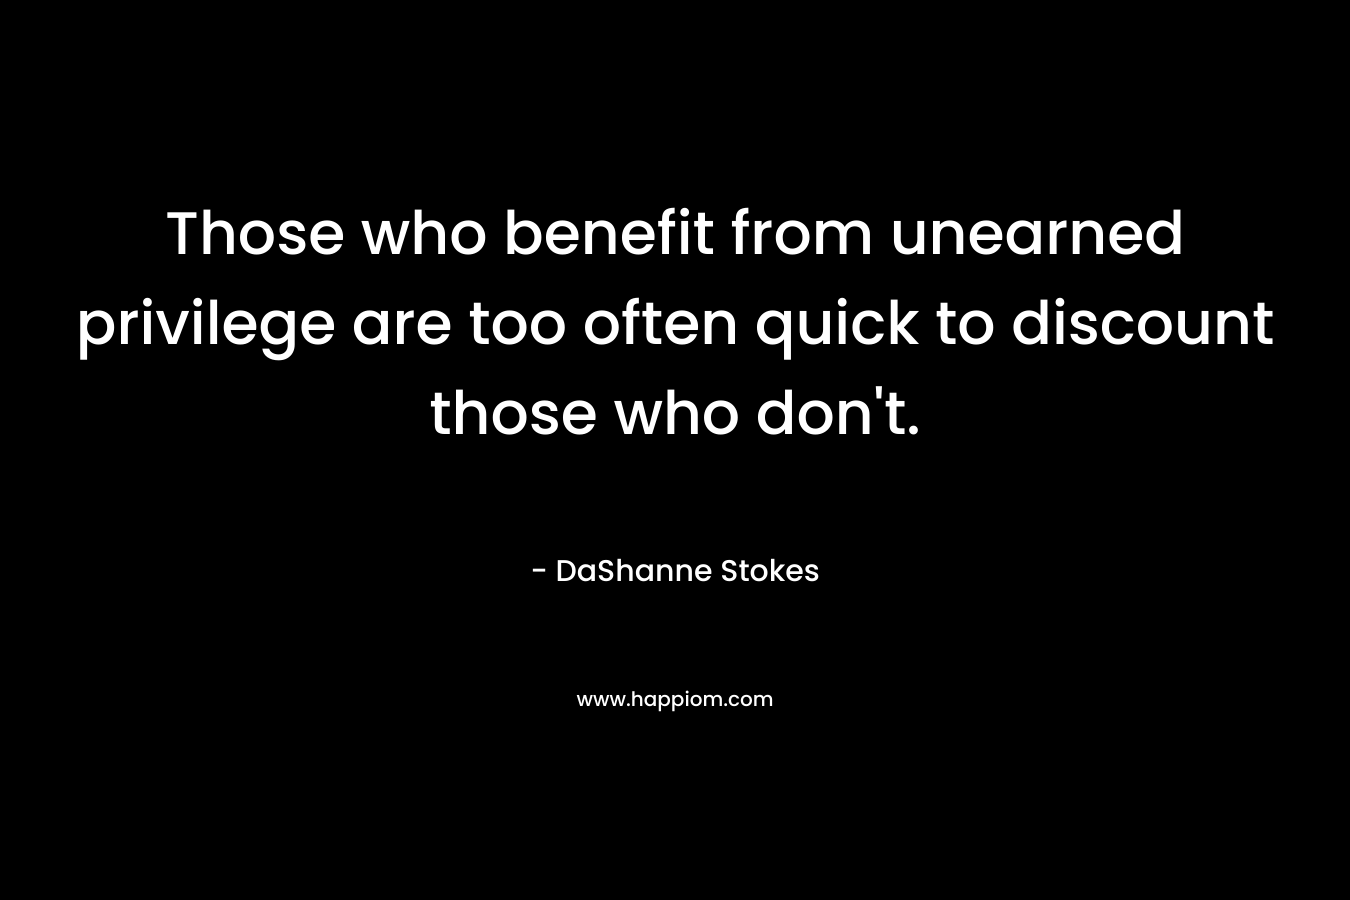 Those who benefit from unearned privilege are too often quick to discount those who don't.